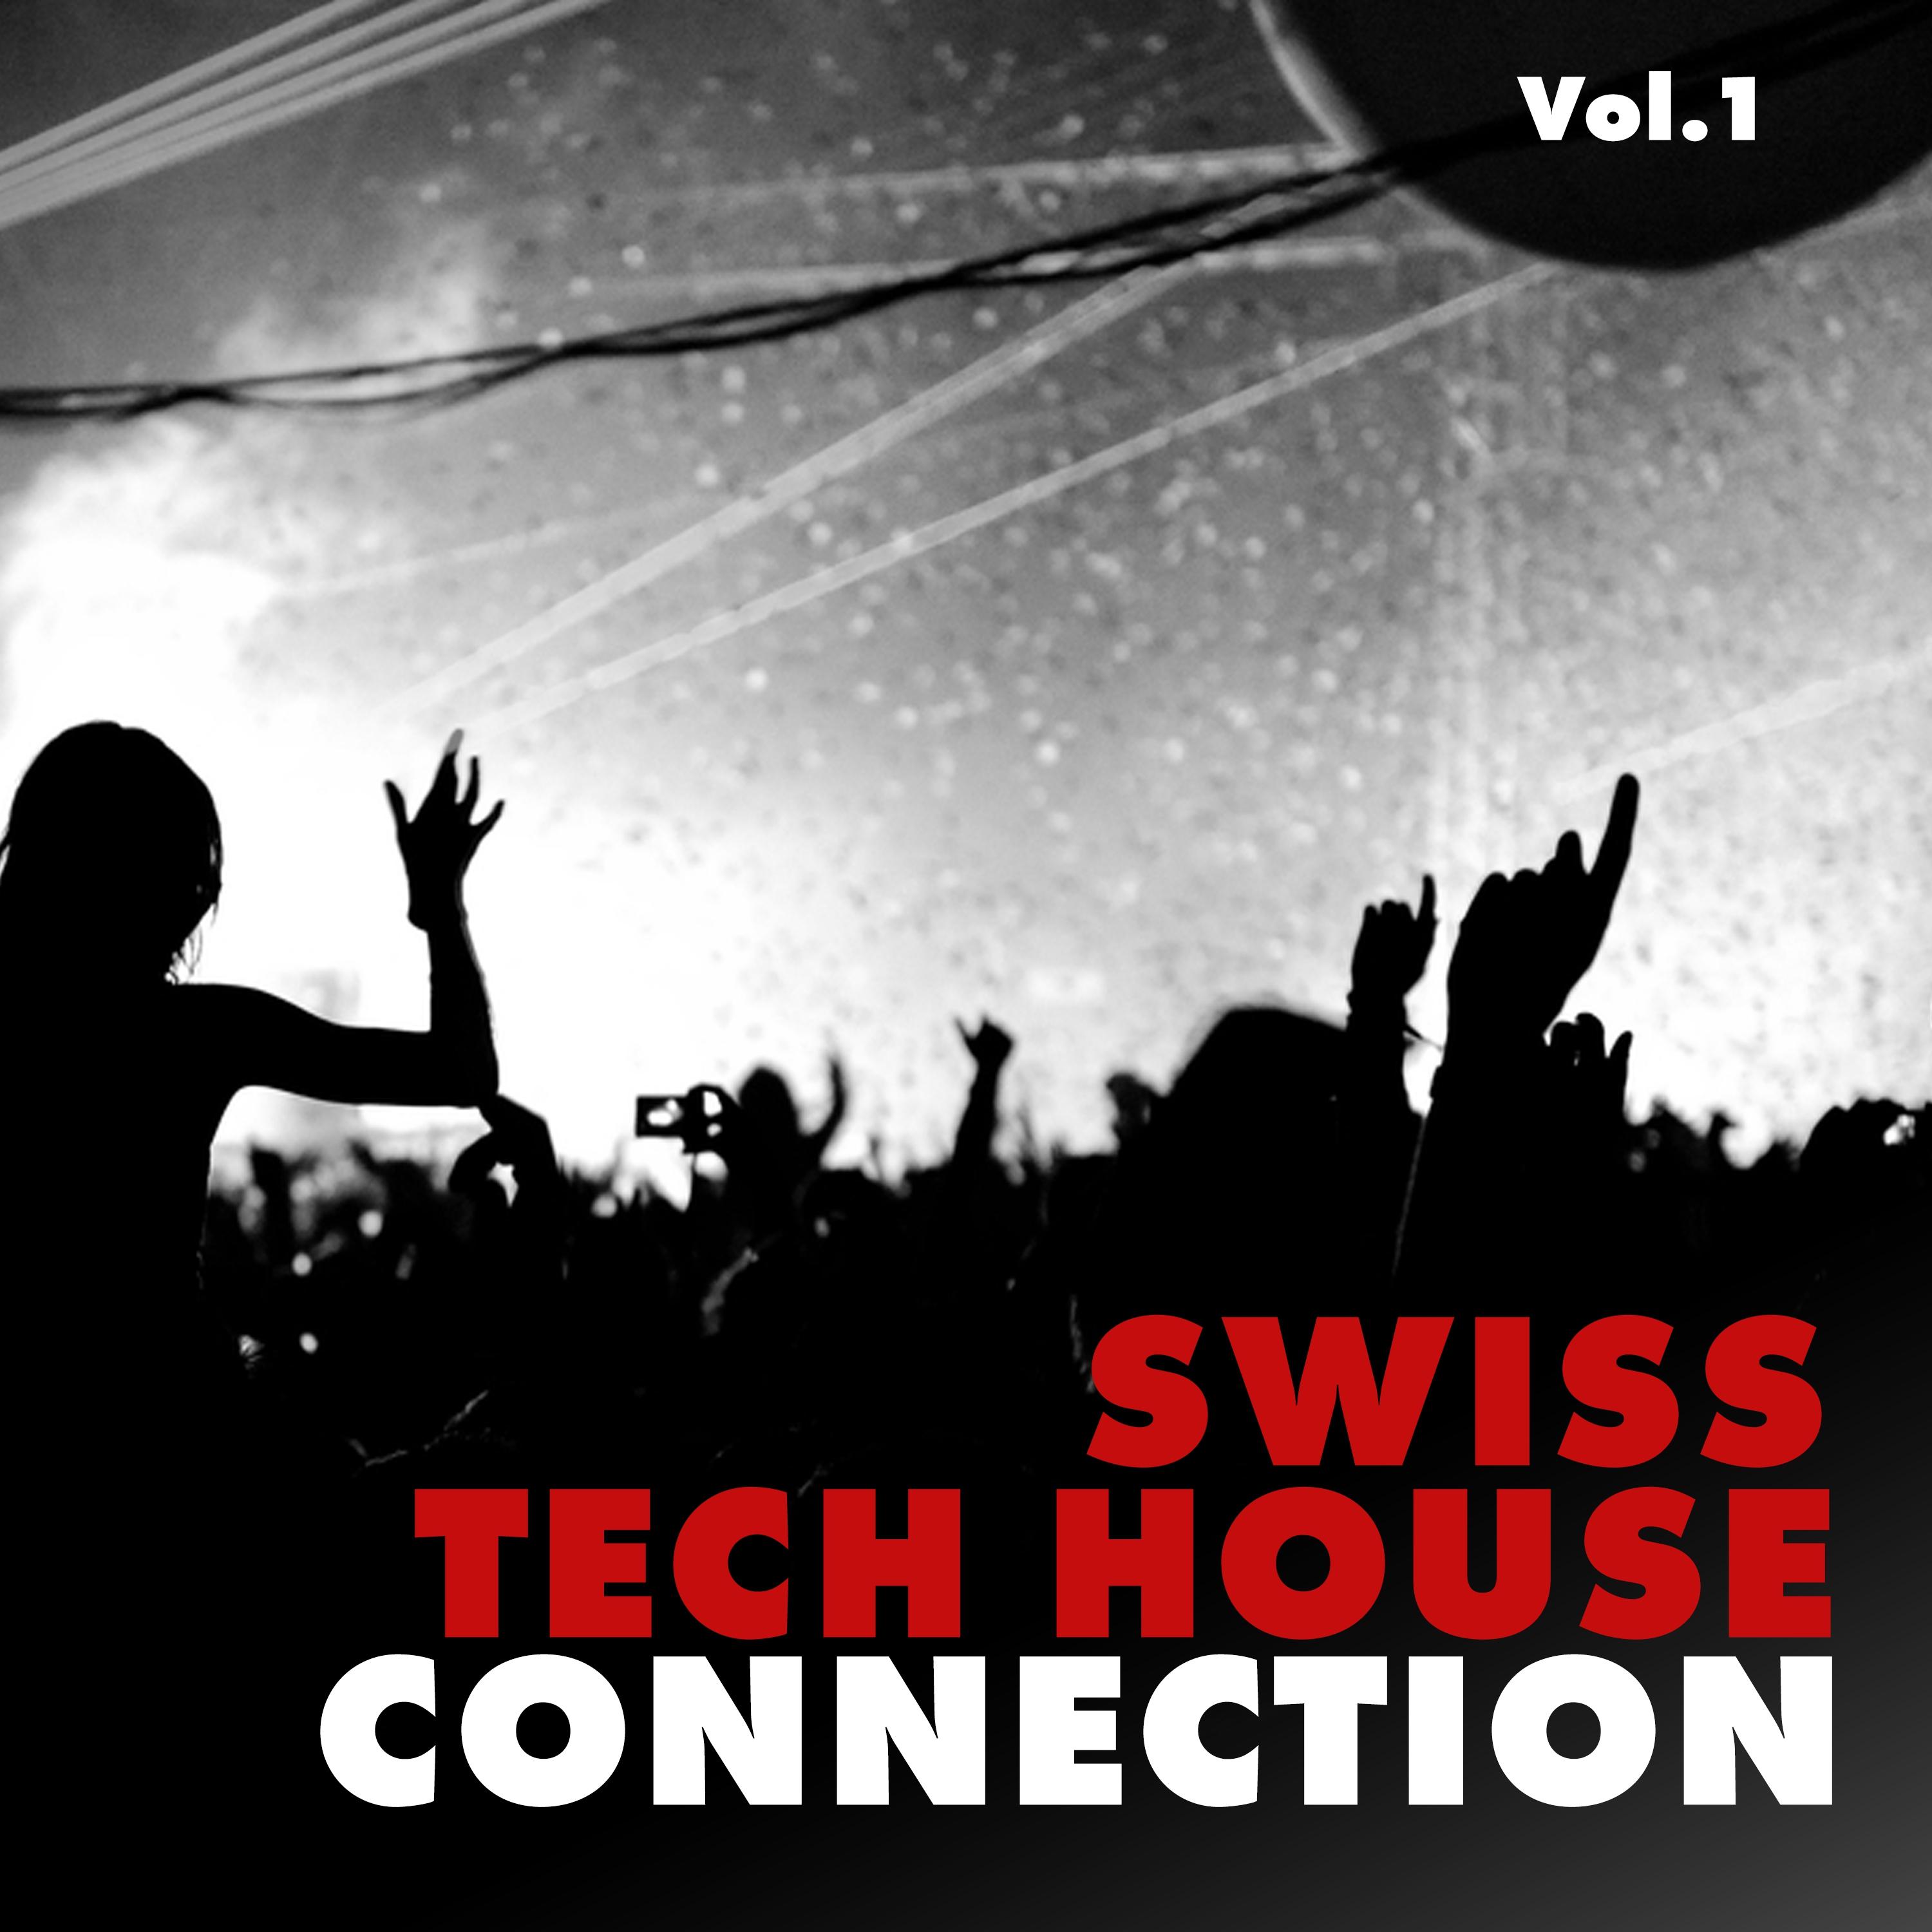 Swiss Tech House Connection, Vol. 1